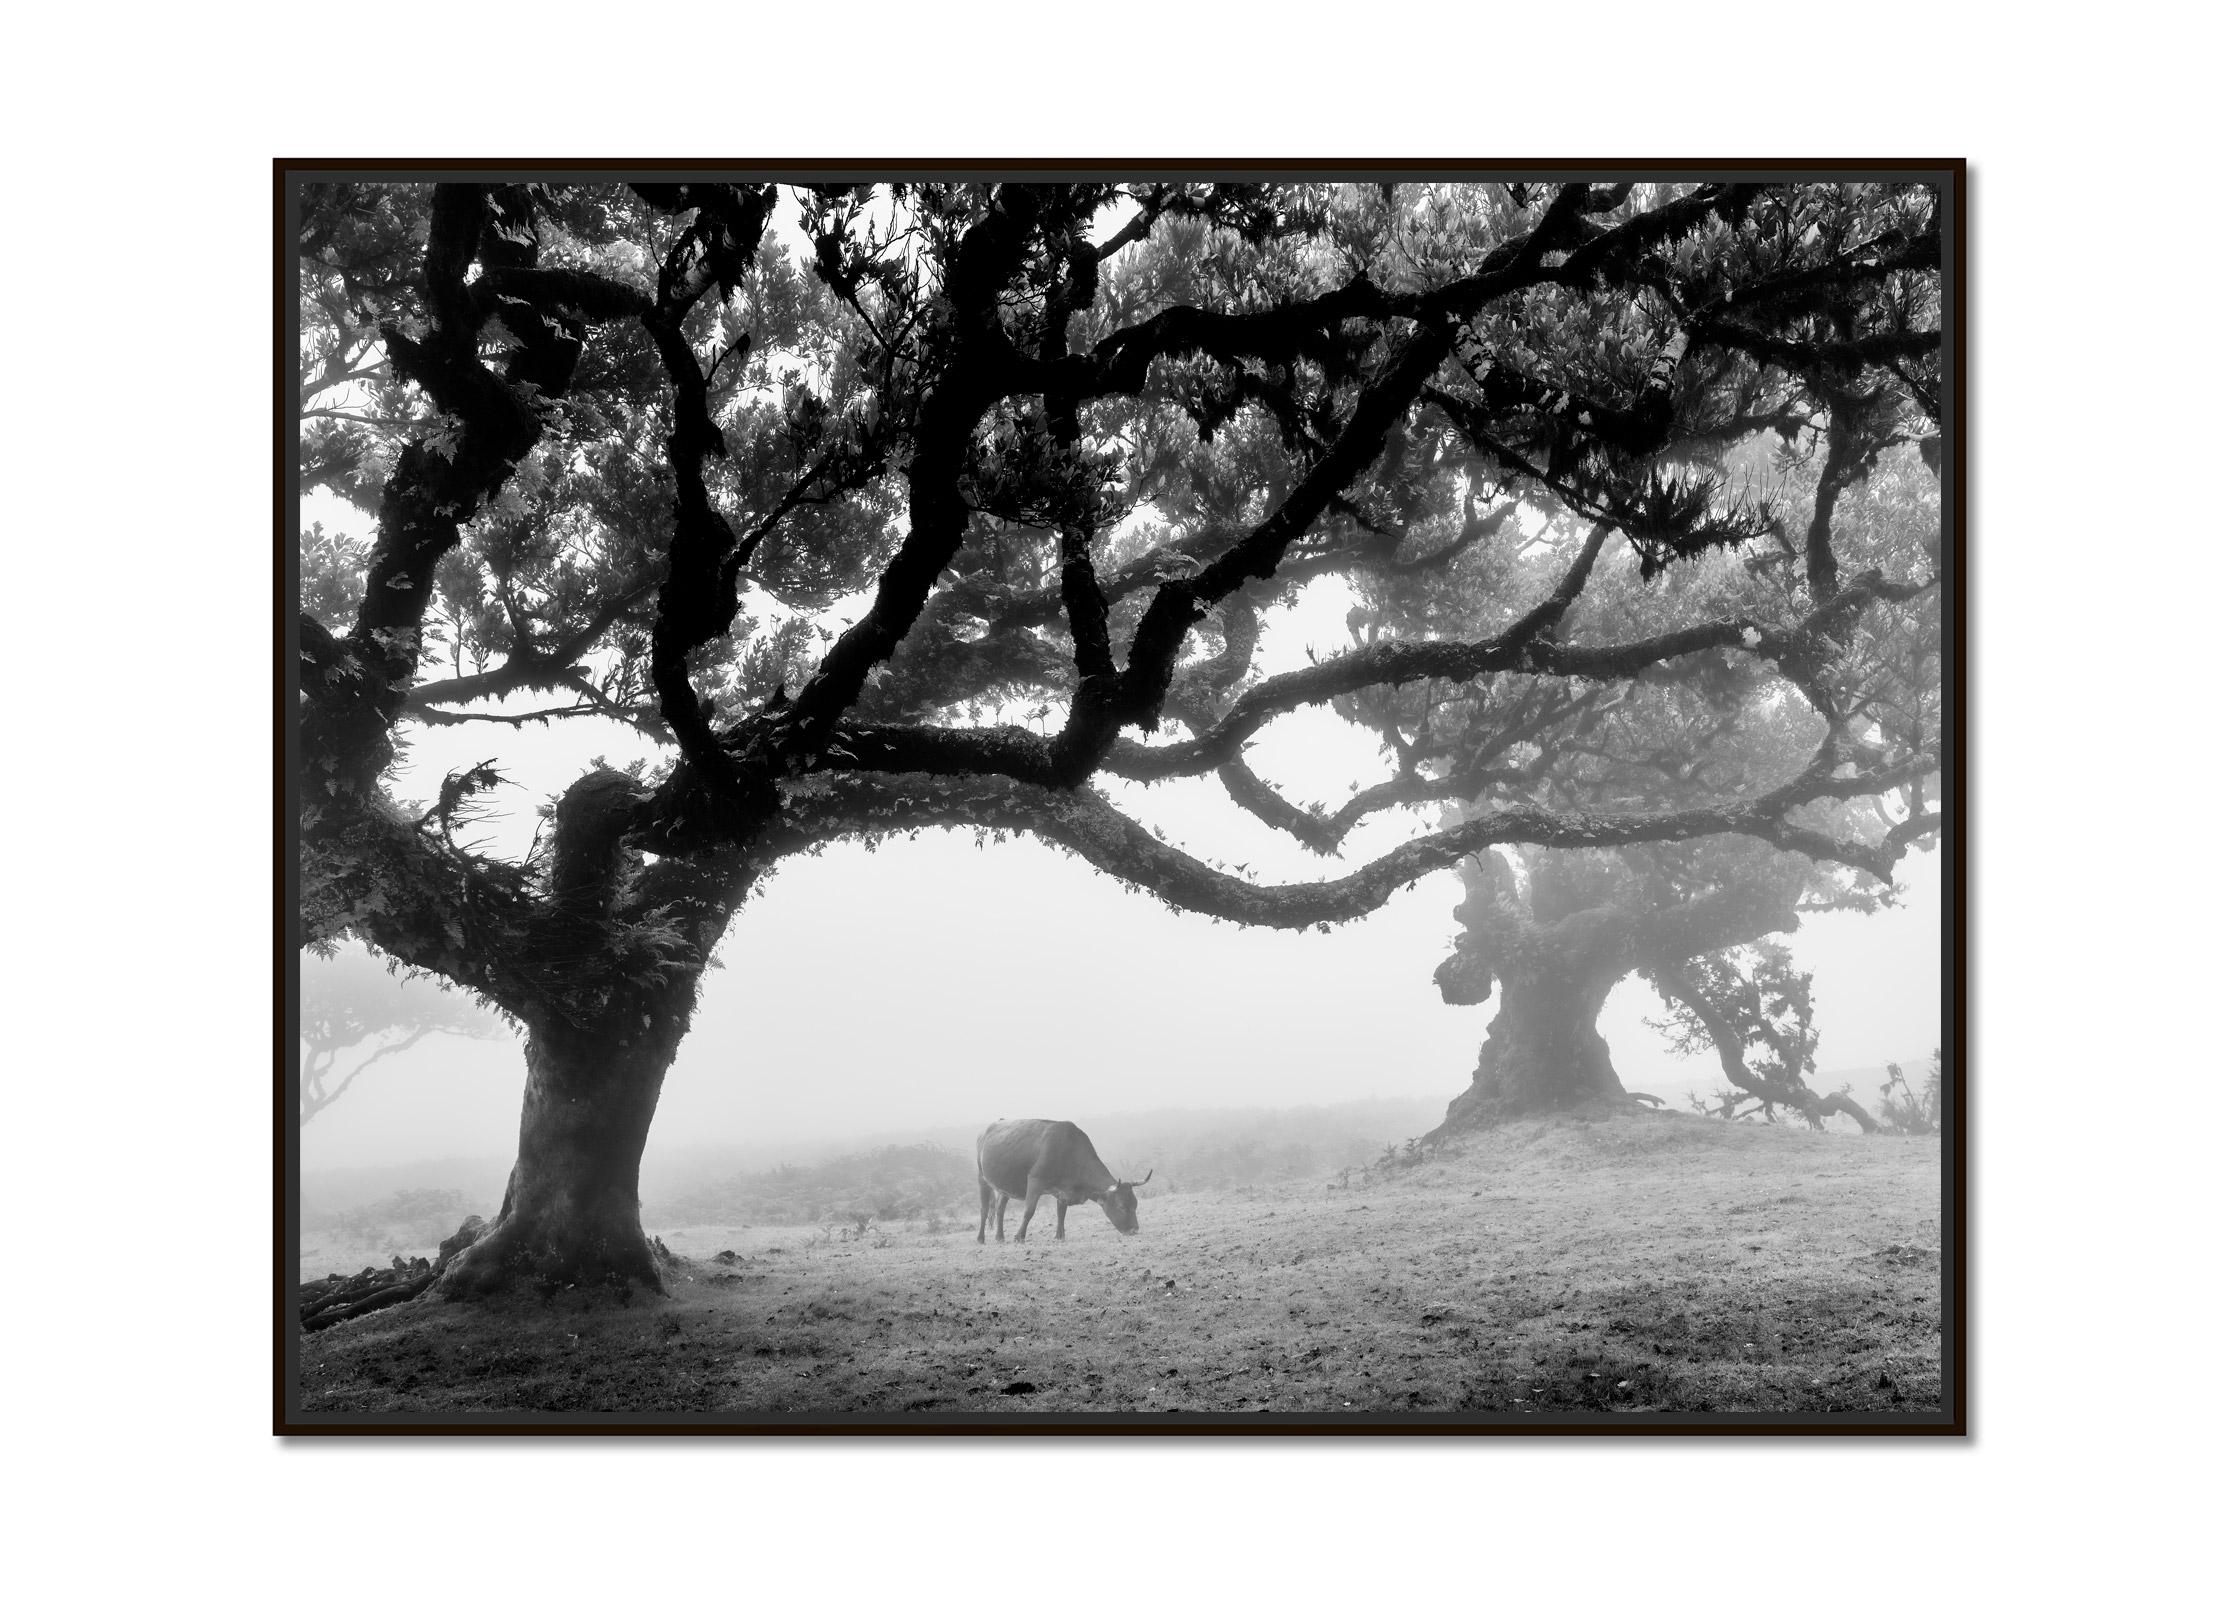 Cows on the foggy Pasture, Madeira, black and white photography, landscape, art - Photograph by Gerald Berghammer